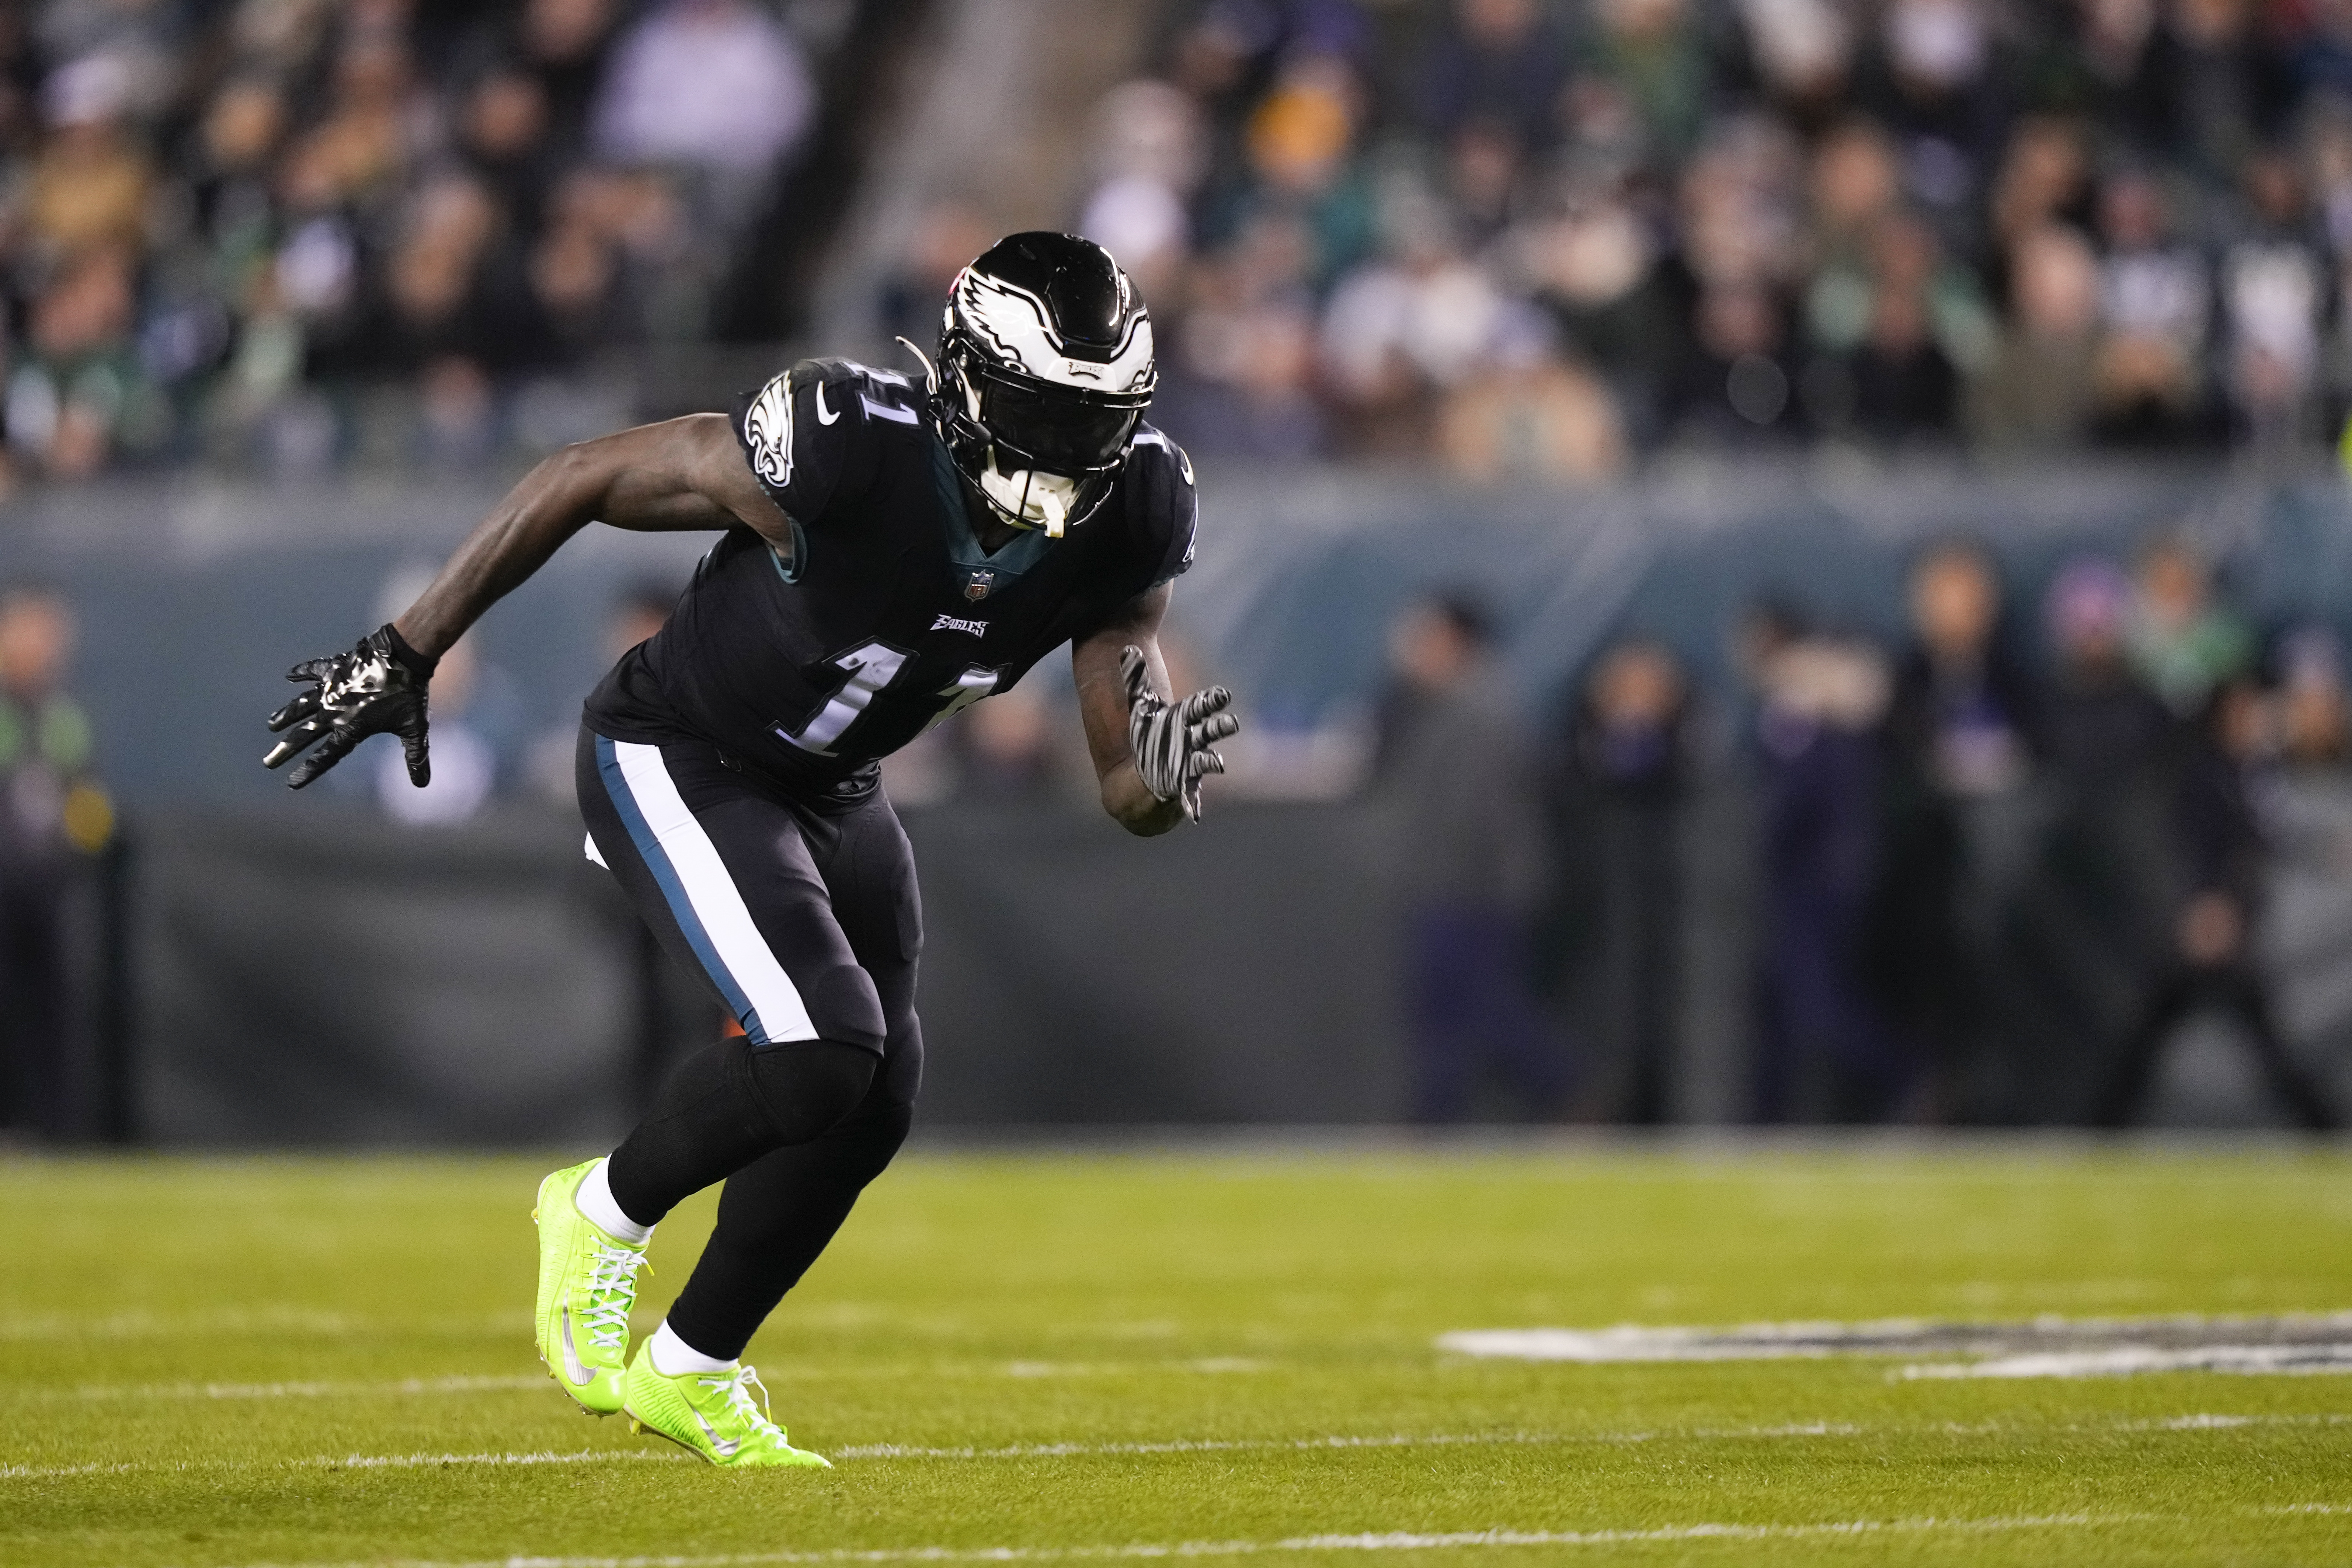 Wide receivers Brown, Smith form 'Dynamic Duo' for Eagles